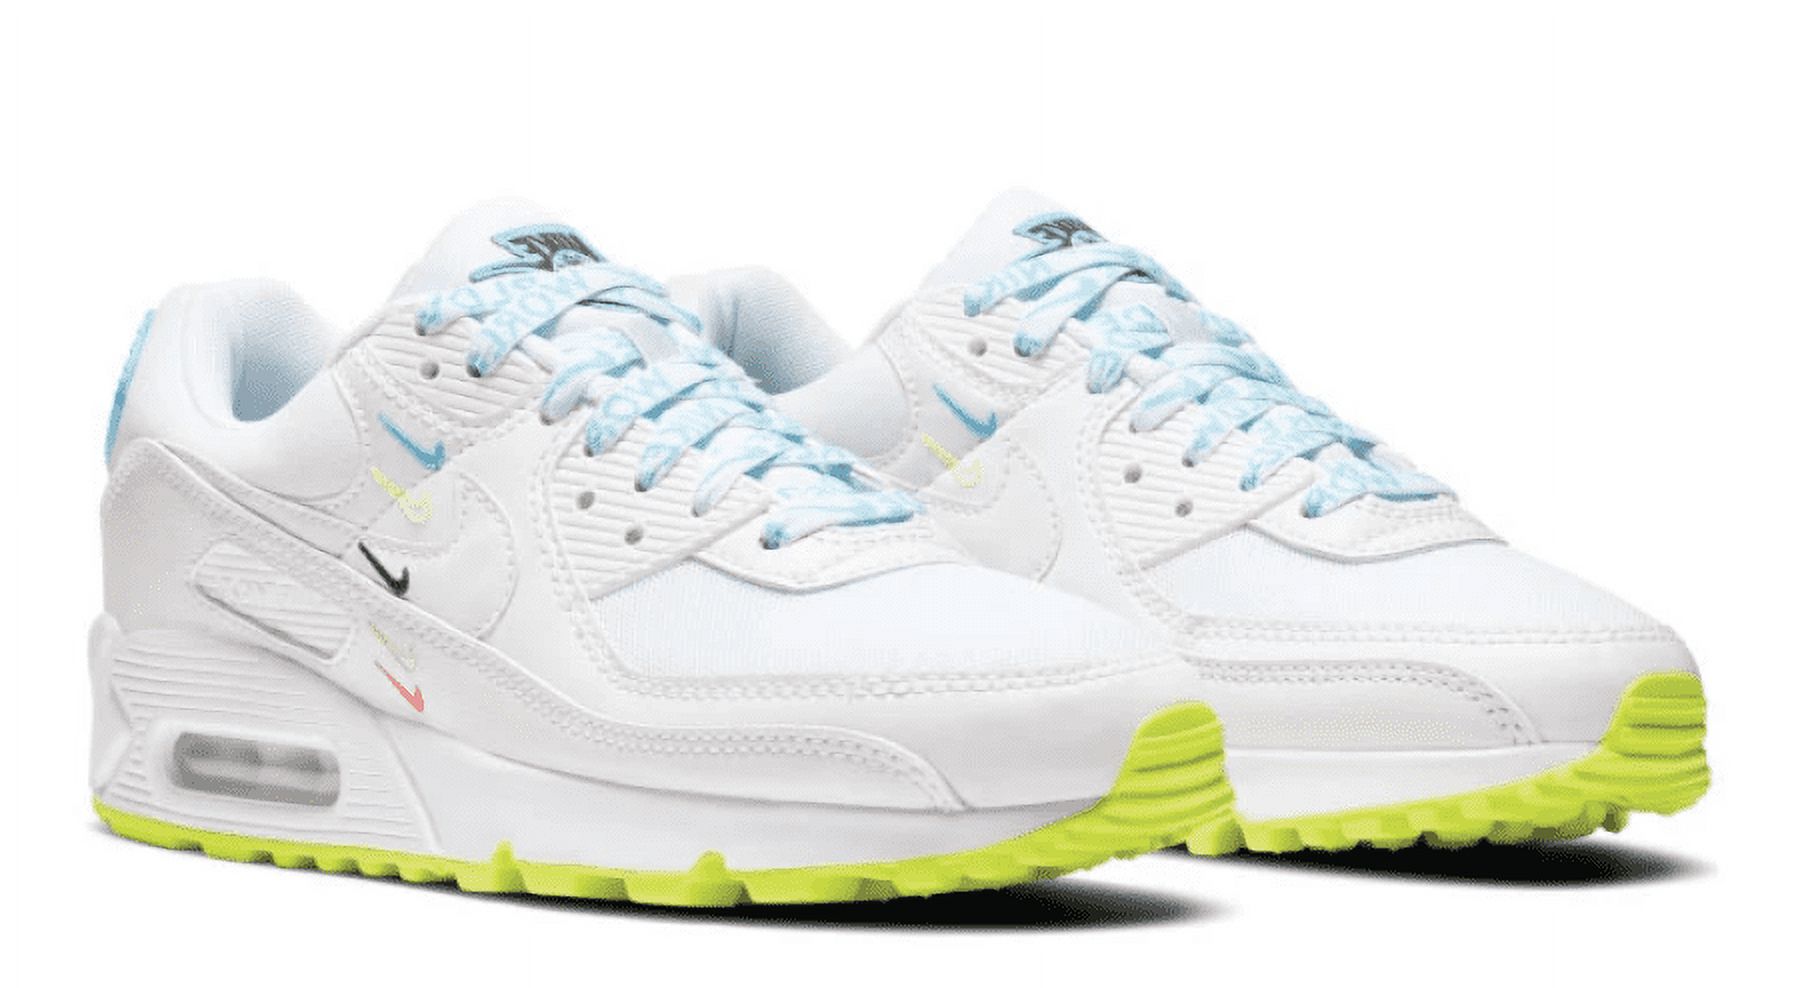 Nike Womens Air Max 90 Se "WorldWide" Running Shoes (7) - image 2 of 5